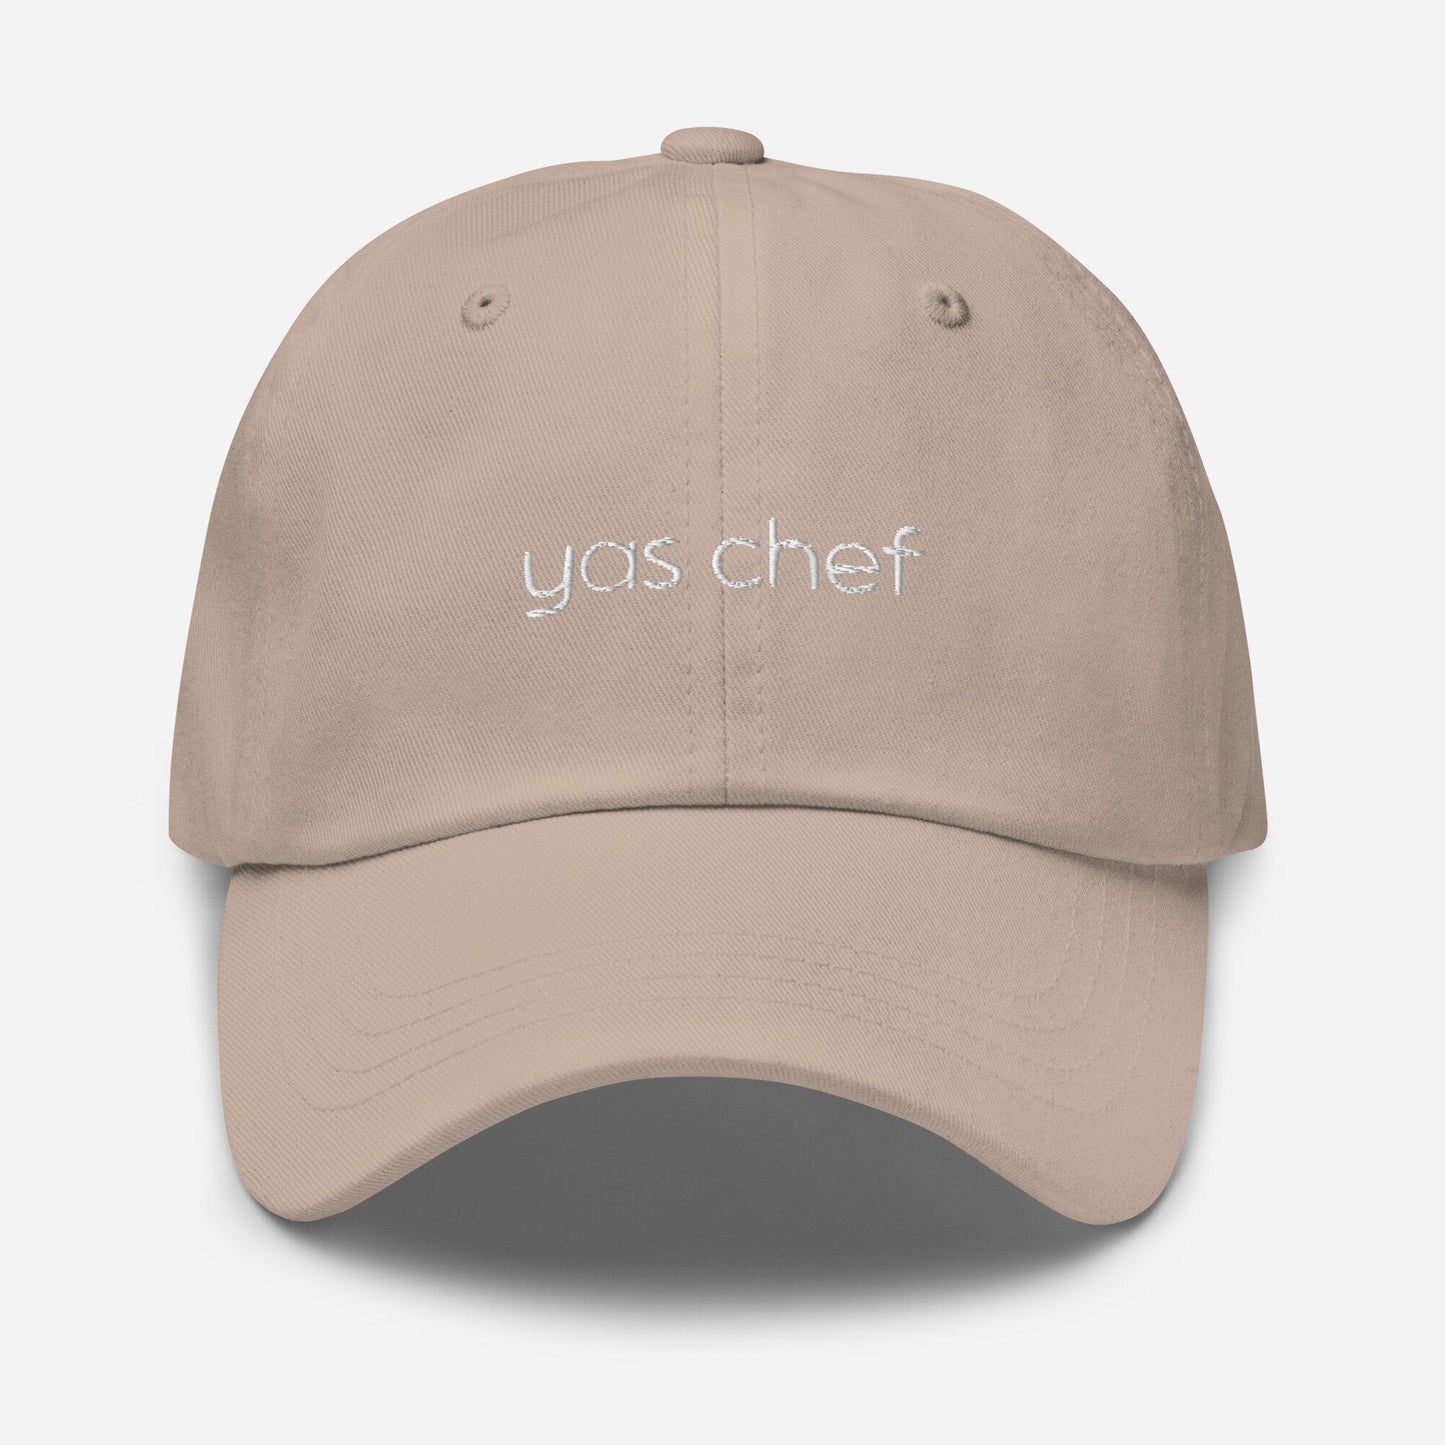 Yas Chef Hat - Yes Chef - Funny Gift for Foodies, Home Cooks, bakers & Chefs - Embroidered Cotton Cap - Evilwater Originals